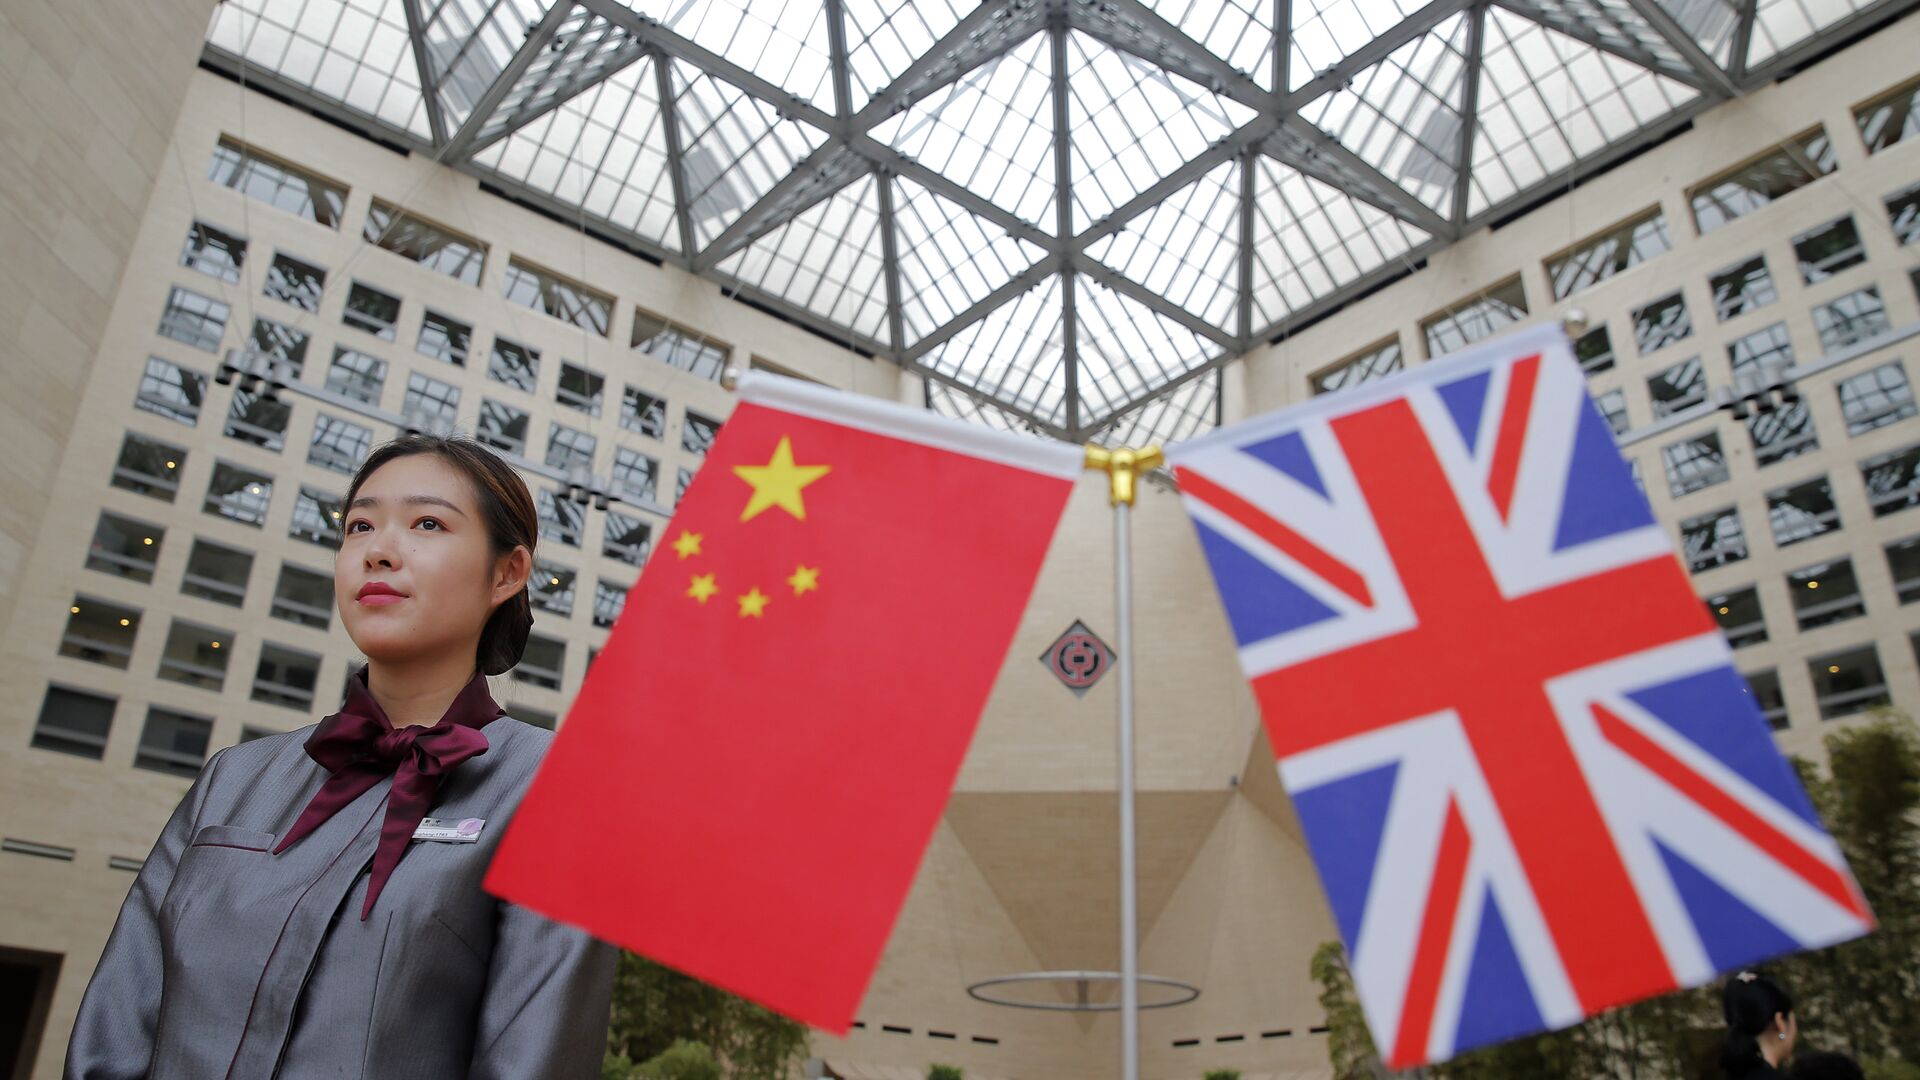 A member of staff stands behind flags as officials arrive for the UK-China High Level Financial Services Roundtable at the Bank of China head office building in Beijing on July 22, 2016 - Sputnik International, 1920, 03.12.2021